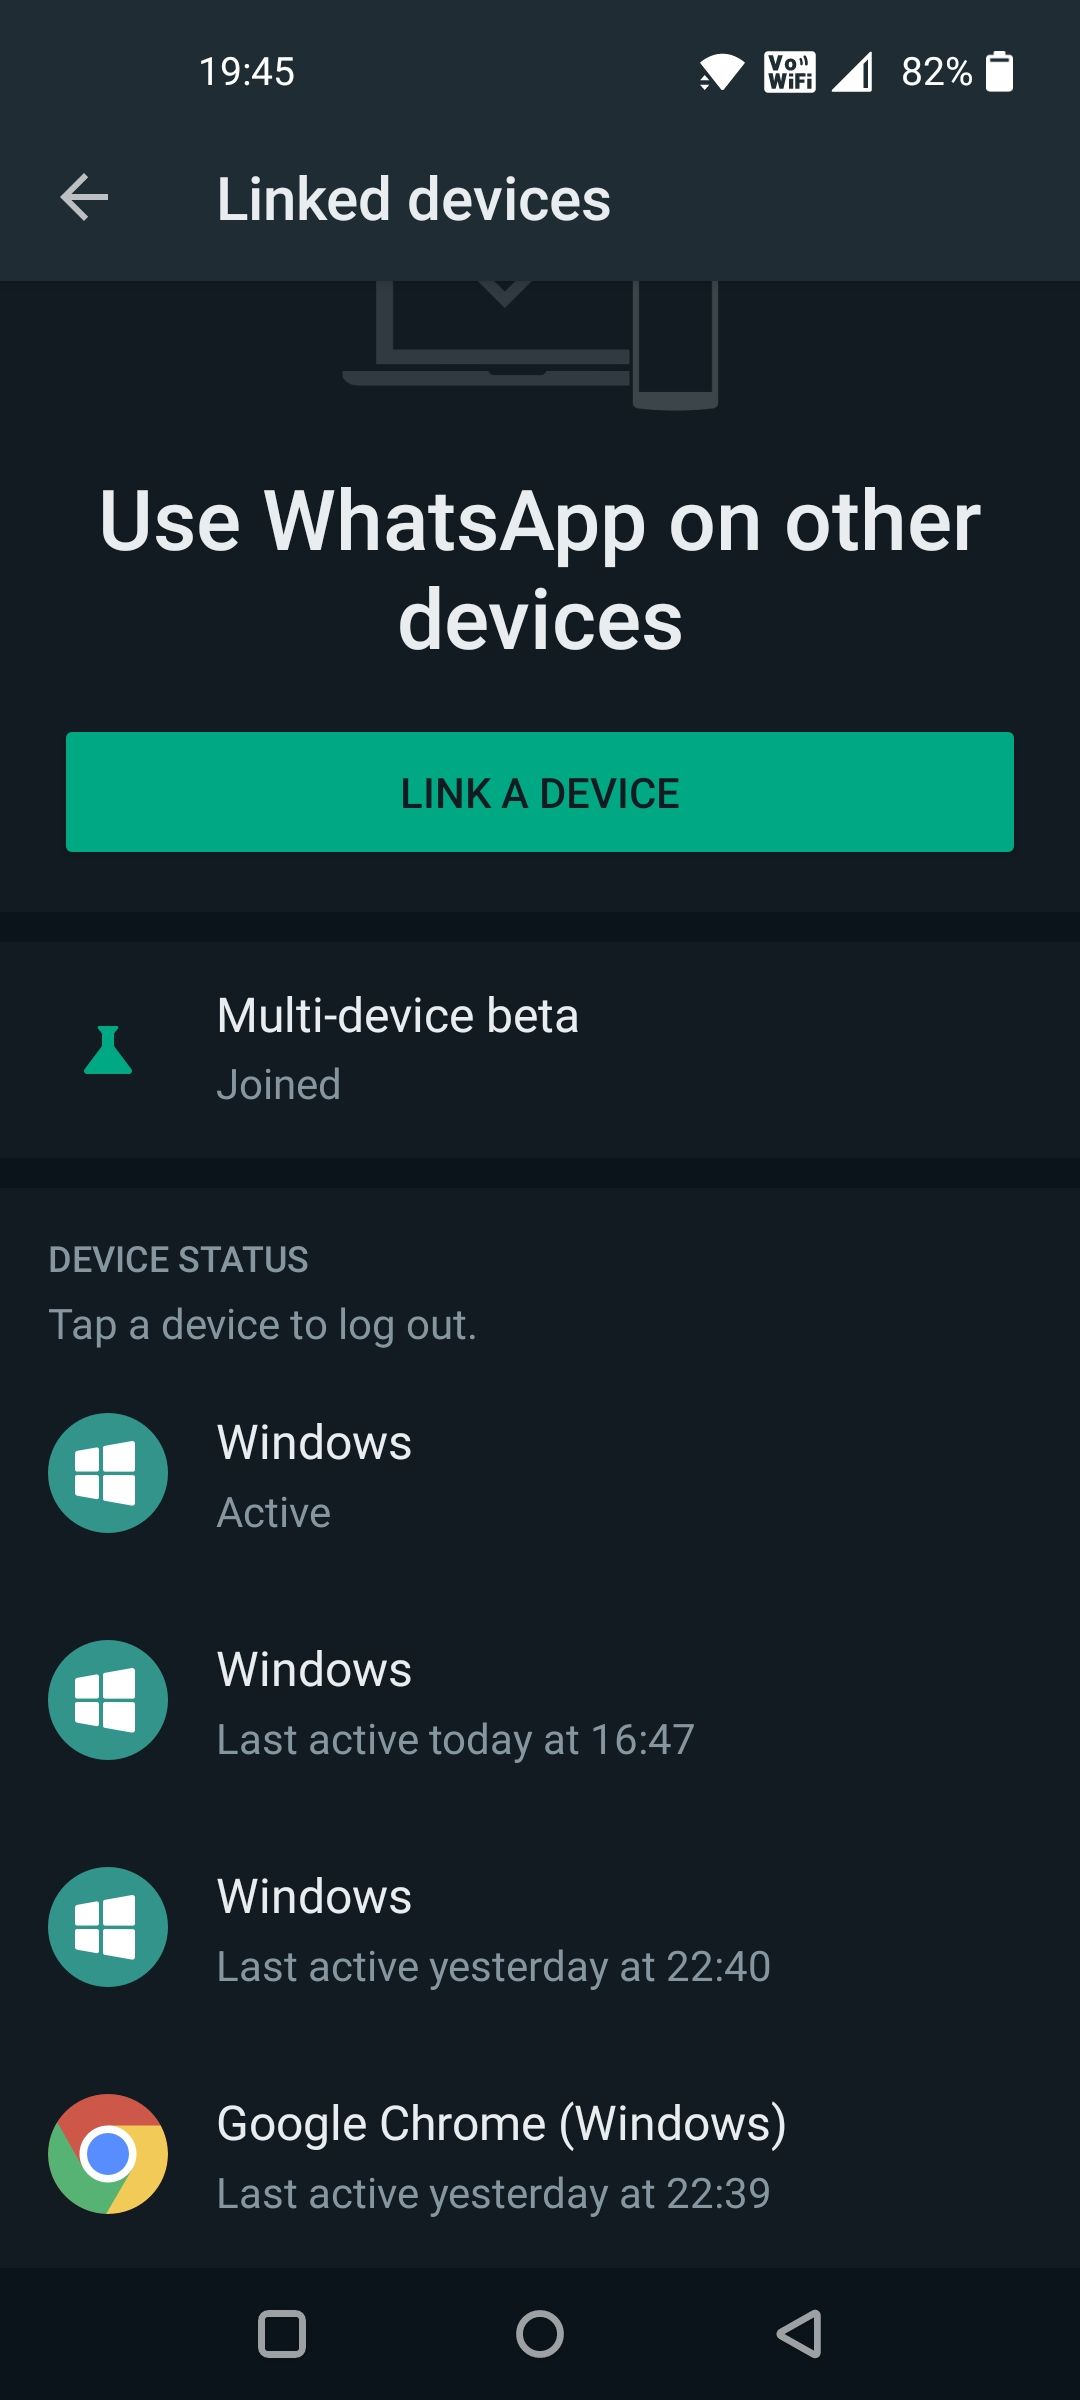 WhatsApp Multi-Device Beta Link up to 4 Devices